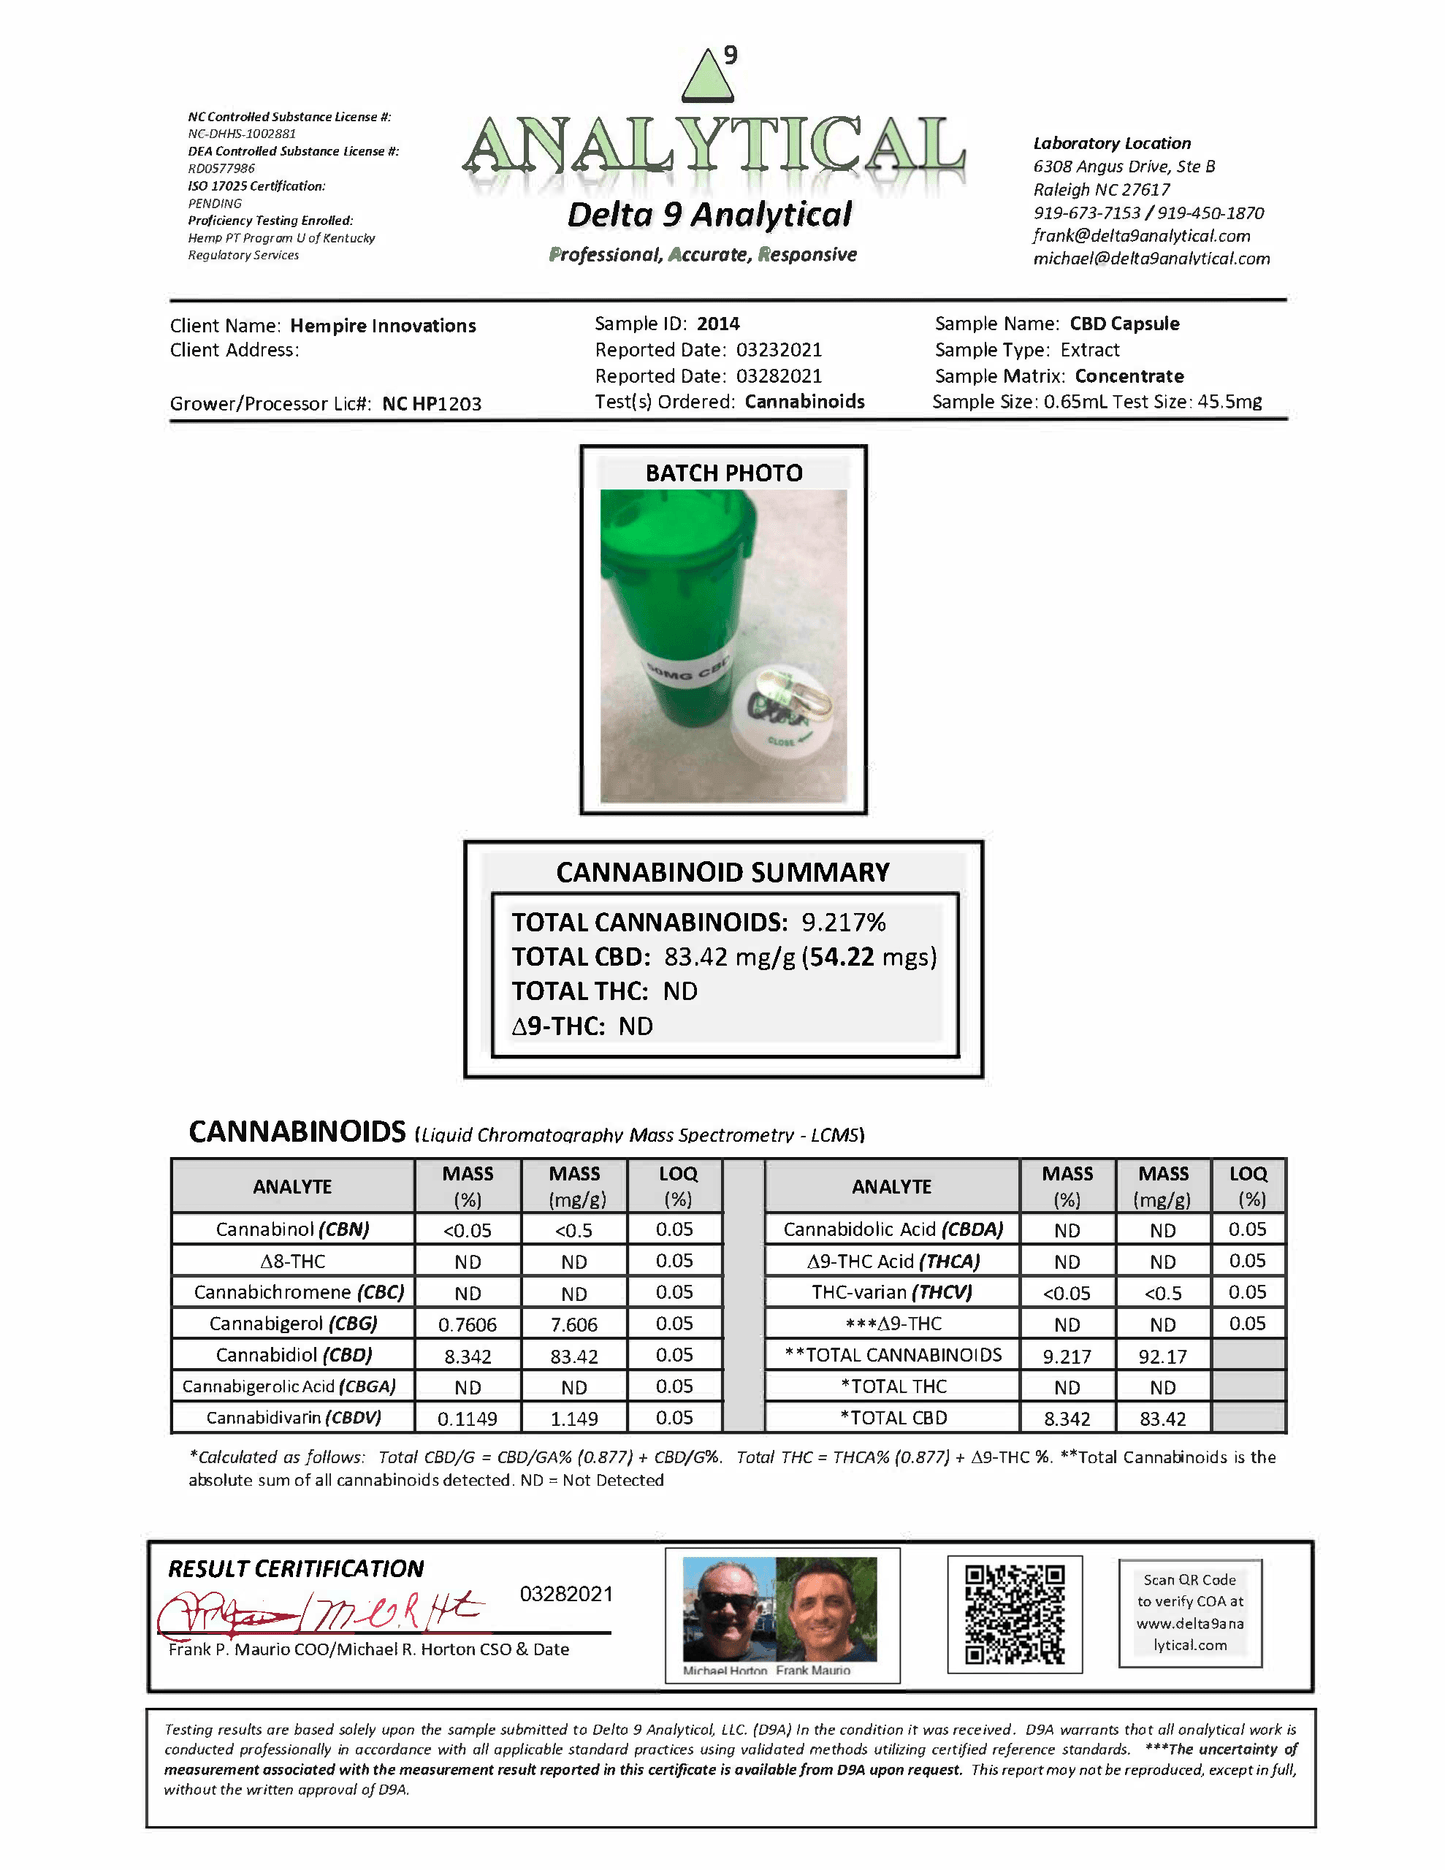 
                  
                    "DEA 3rd party lab testing report confirming Full Spectrum CBD Capsules contain less than 0.3% Delta-9 THC.
                  
                